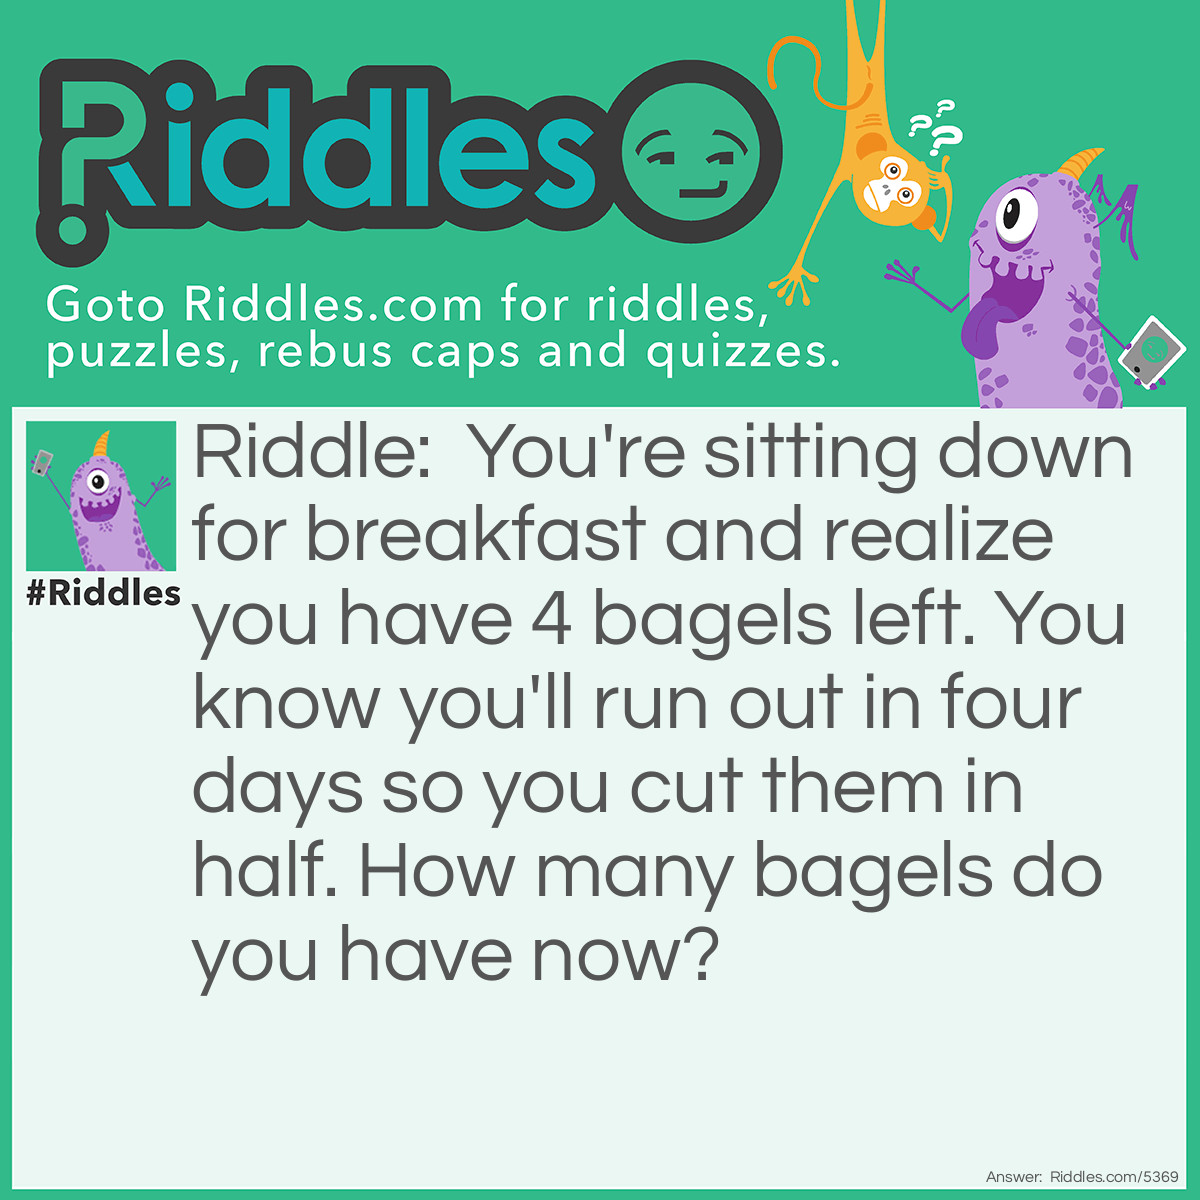 Riddle: You're sitting down for breakfast and realize you have 4 bagels left. You know you'll run out in four days so you cut them in half. How many bagels do you have now? Answer: 4 Bagels.